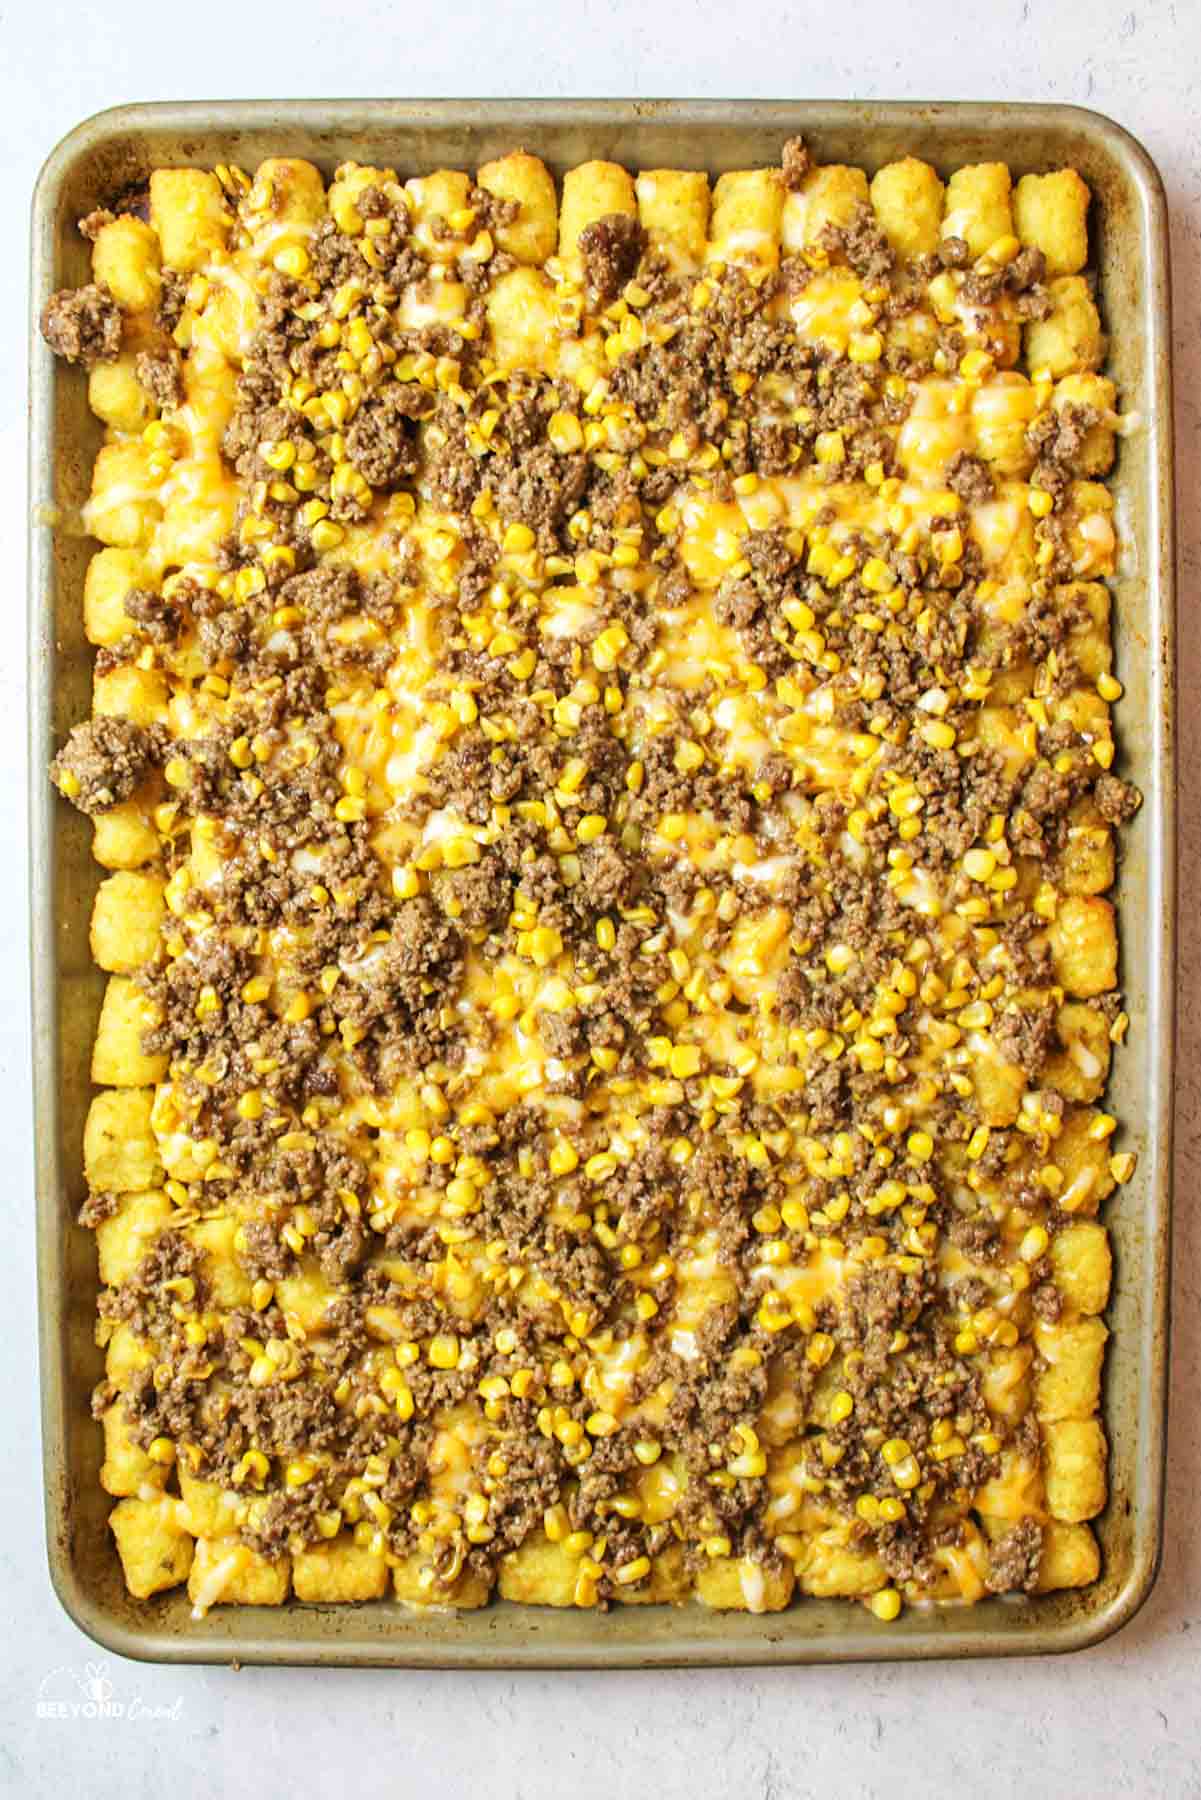 cheese and meat with corn on top of tater tots on baking sheet